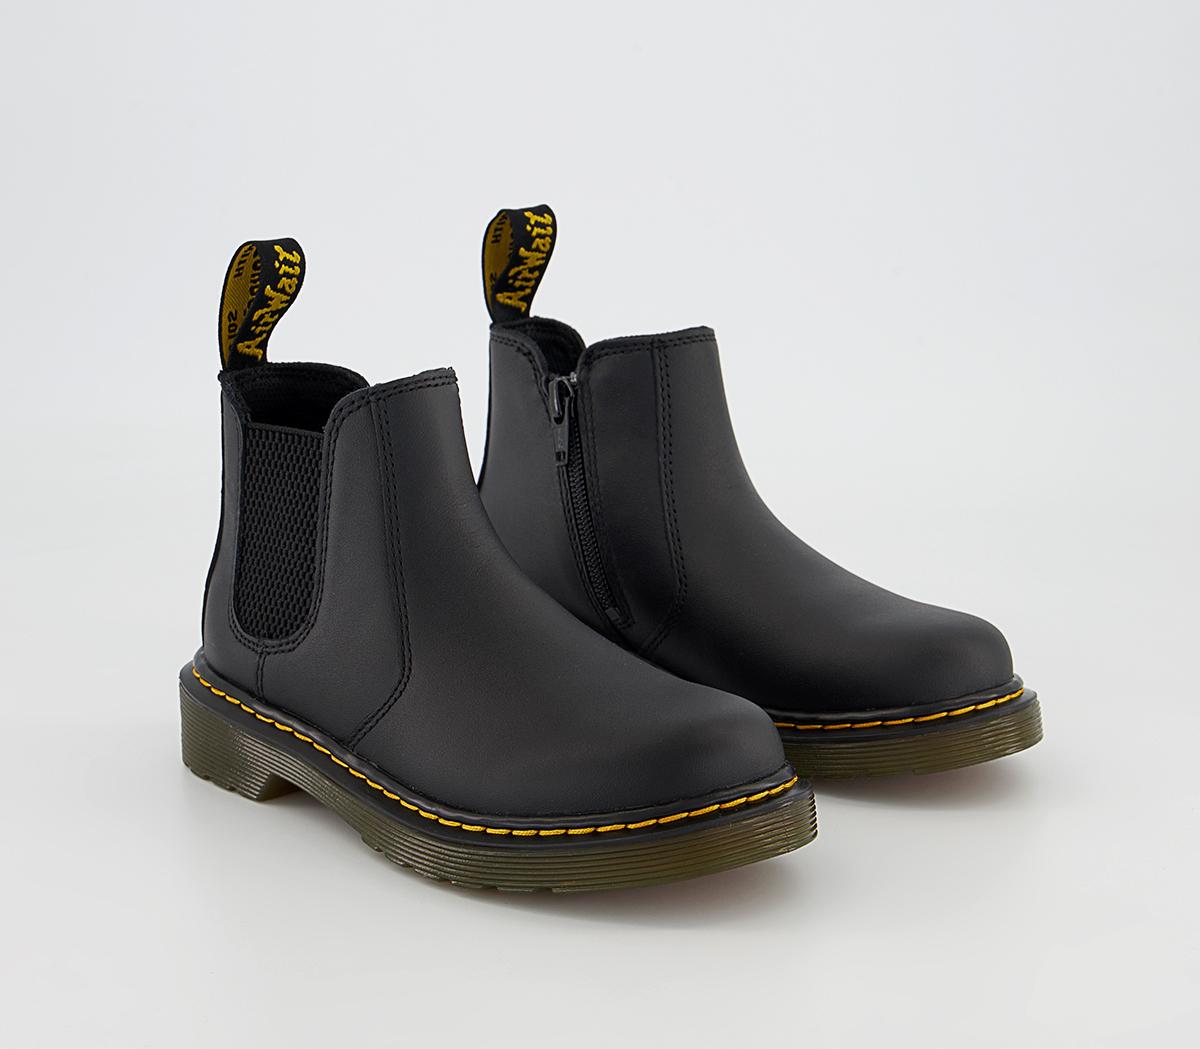 Dr. Martens 2976 Junior Chelsea Boots Black, 11 Youth